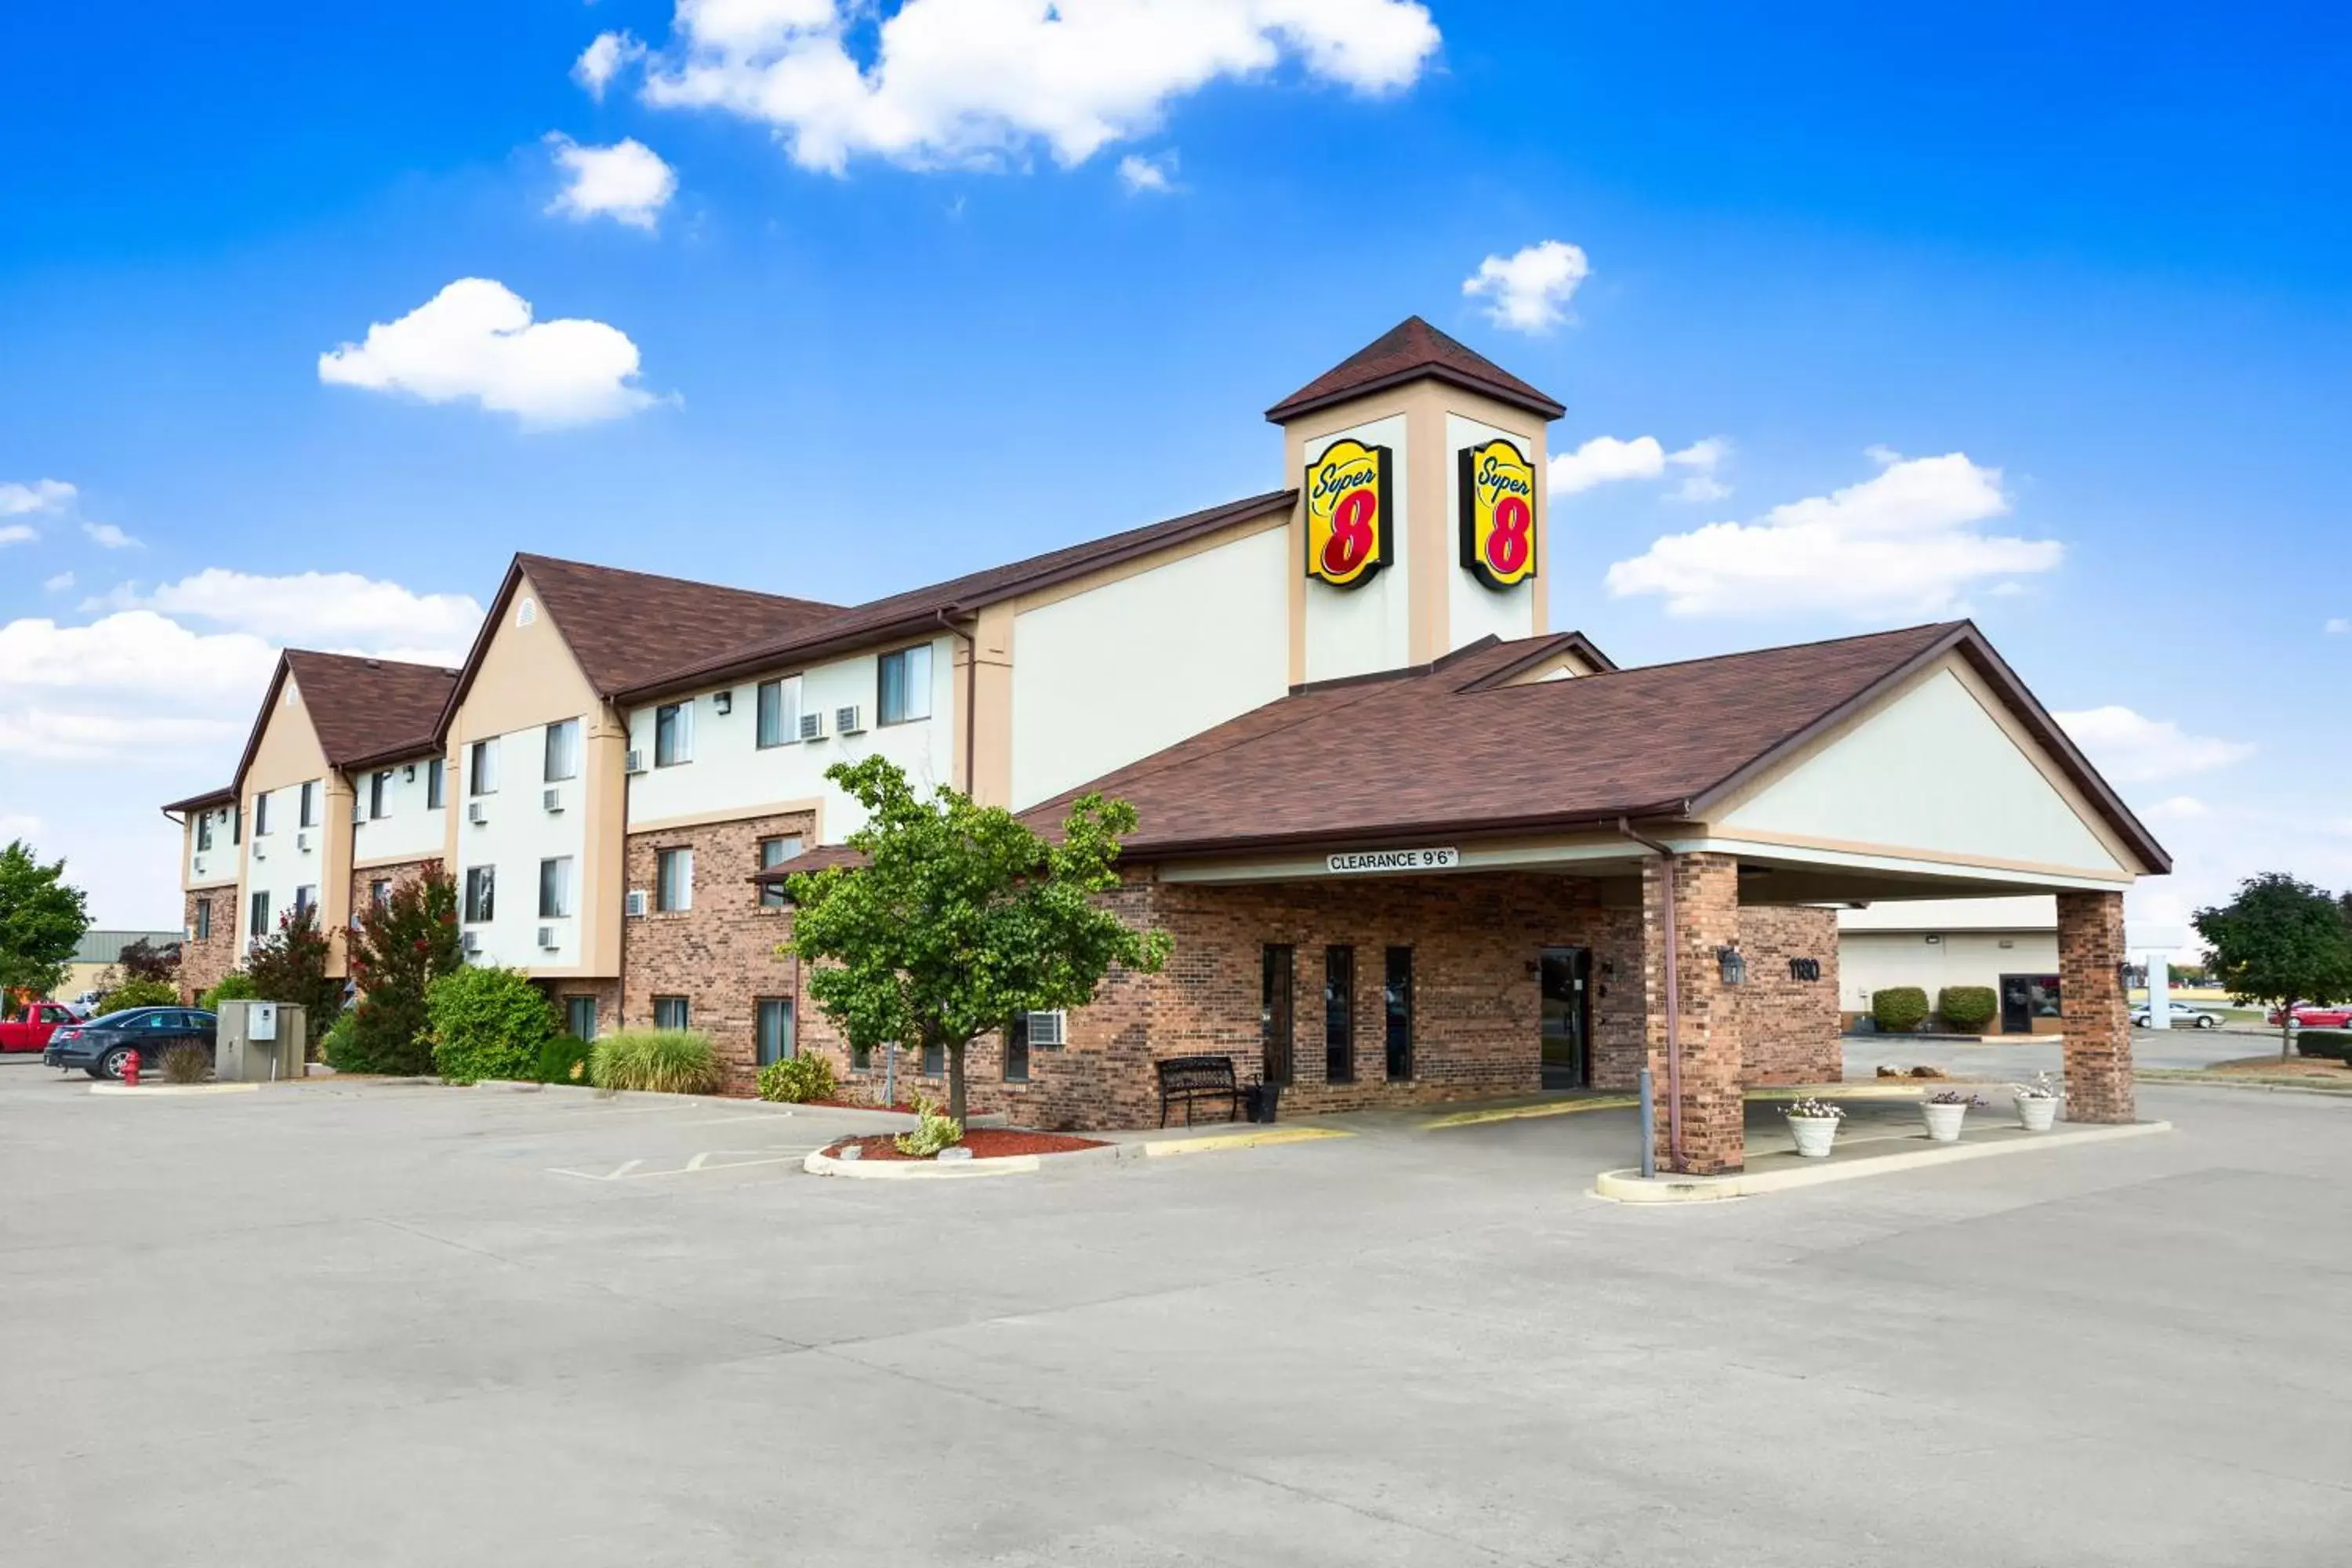 Nearby landmark, Property Building in Super 8 by Wyndham Carbondale